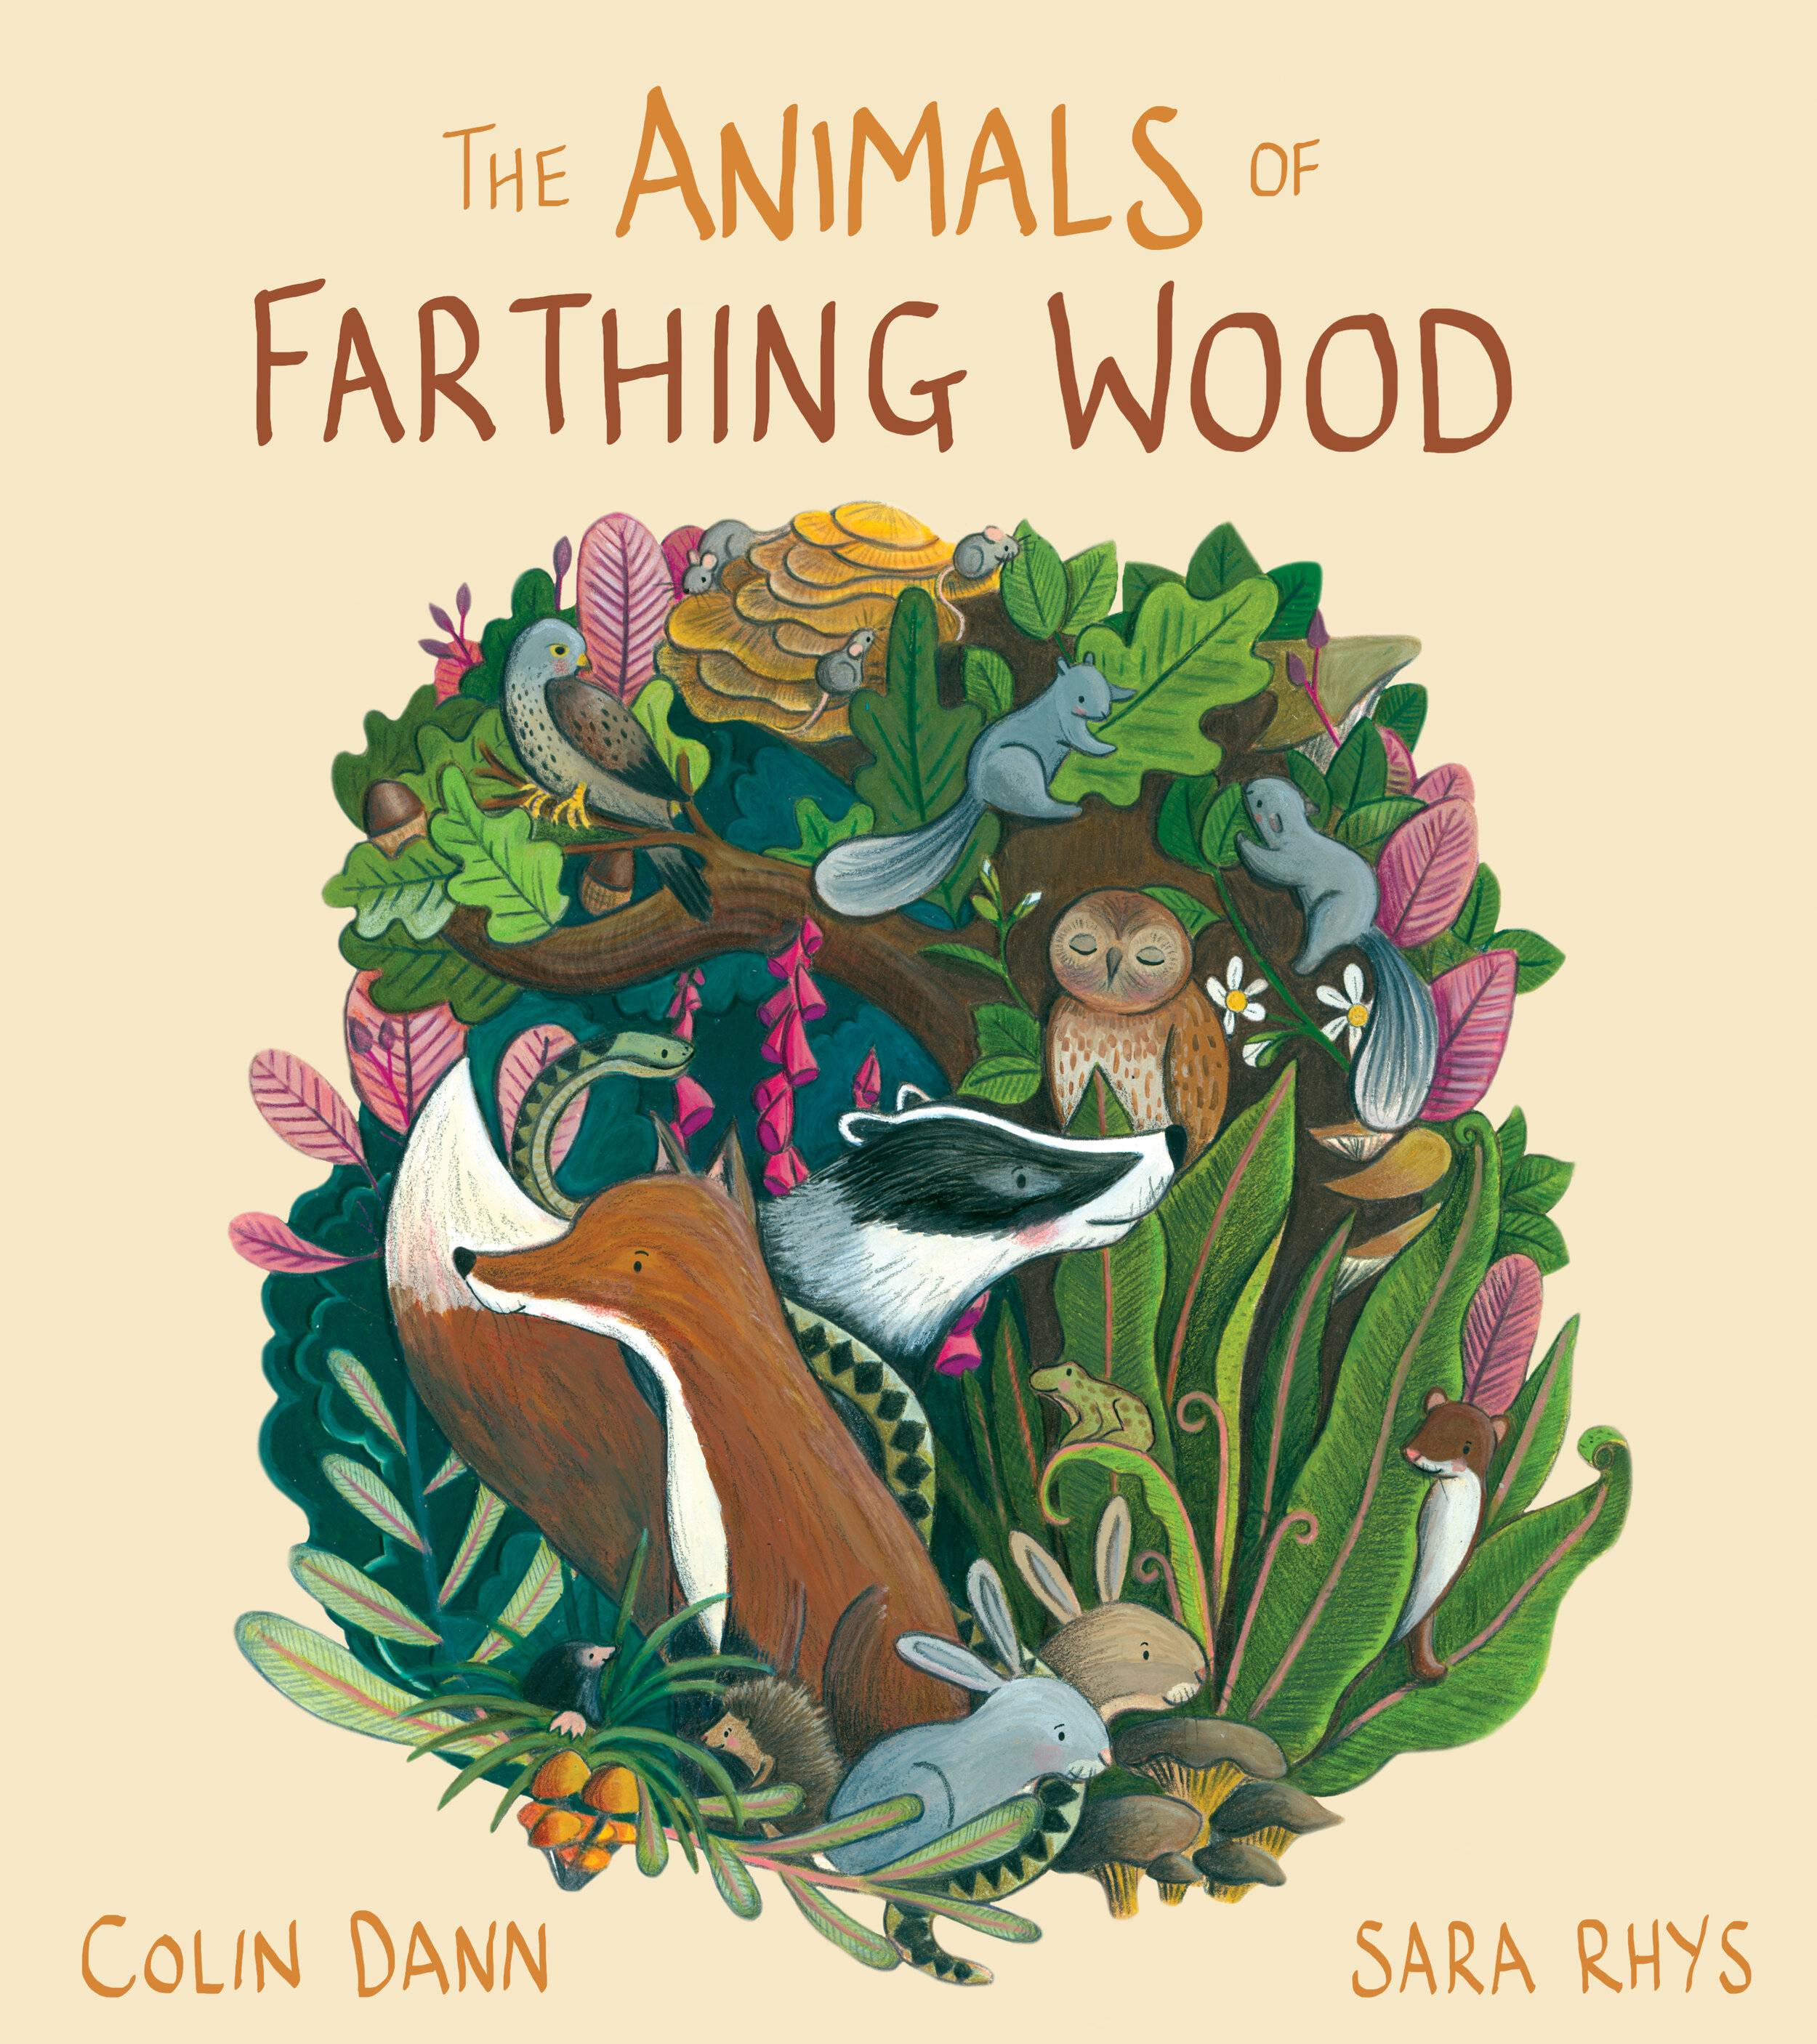 Making an Animals of Farthing Wood Book Cover for my Portfolio — Sara Rhys  Illustration